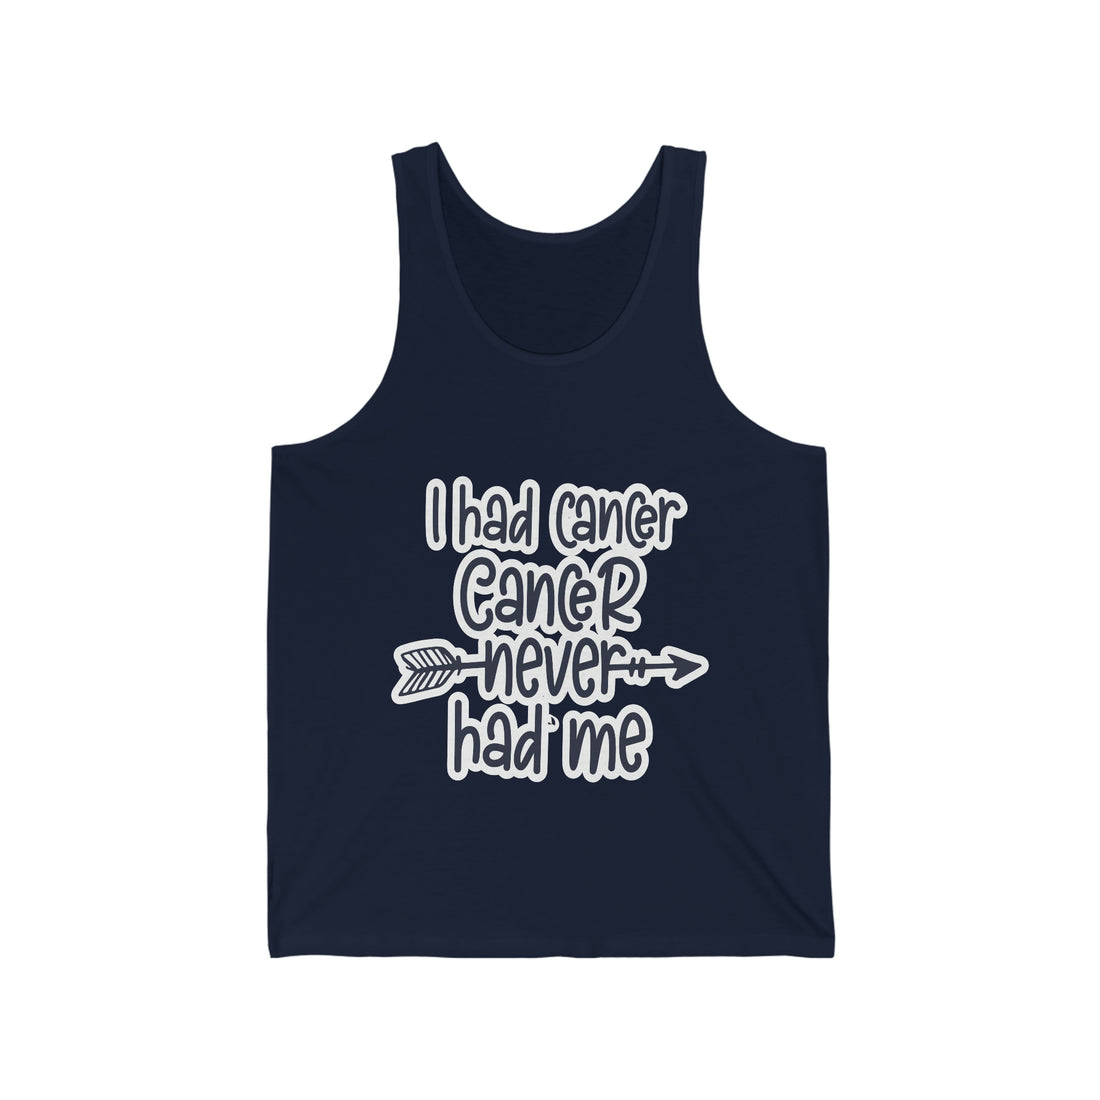 I Had Cancer Cancer Never Had Me  - Unisex Jersey Tank Top